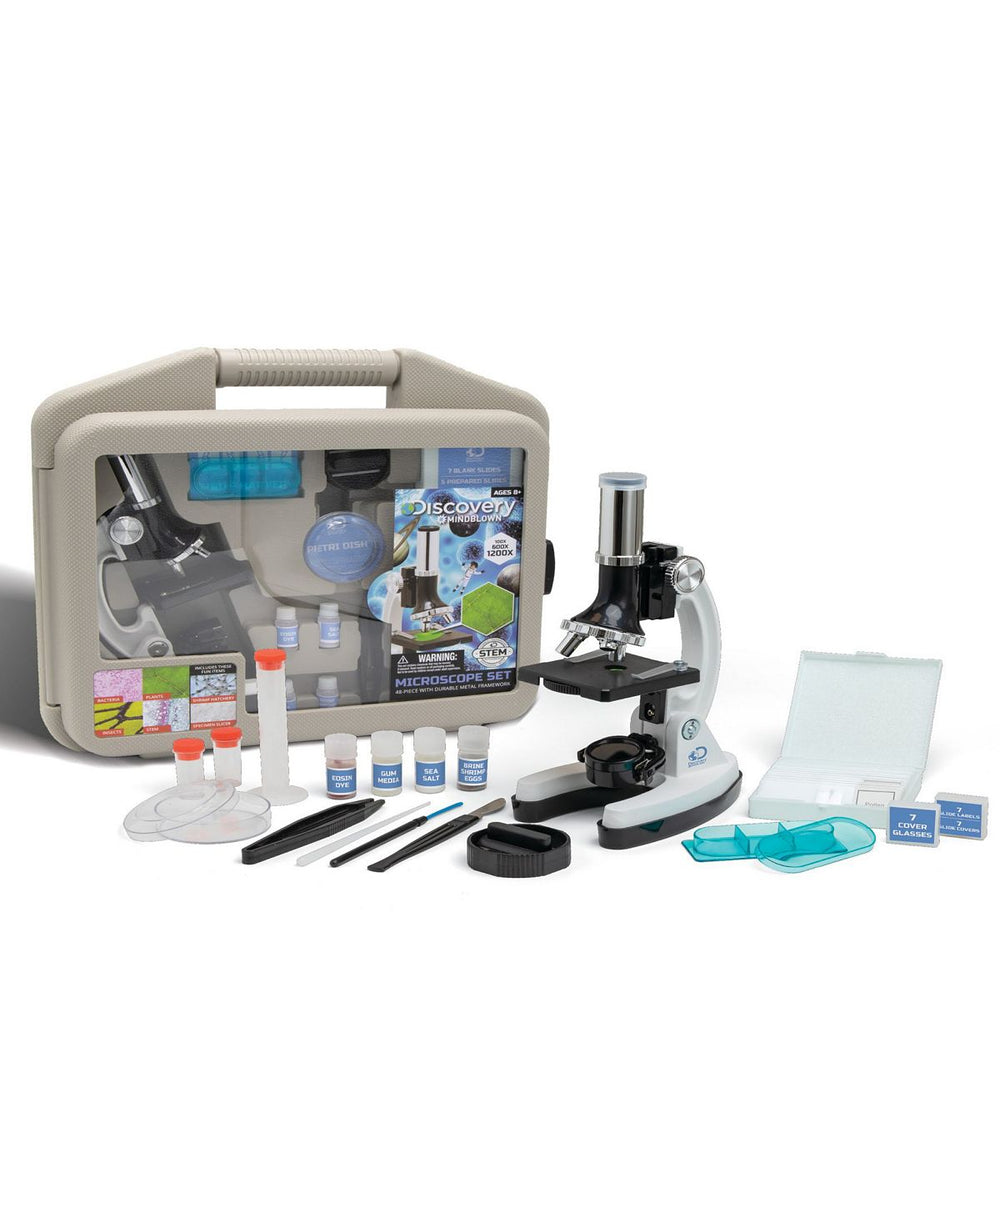 Discovery #MINDBLOWN Microscope Exploration Set, 48-Piece with Metal Case